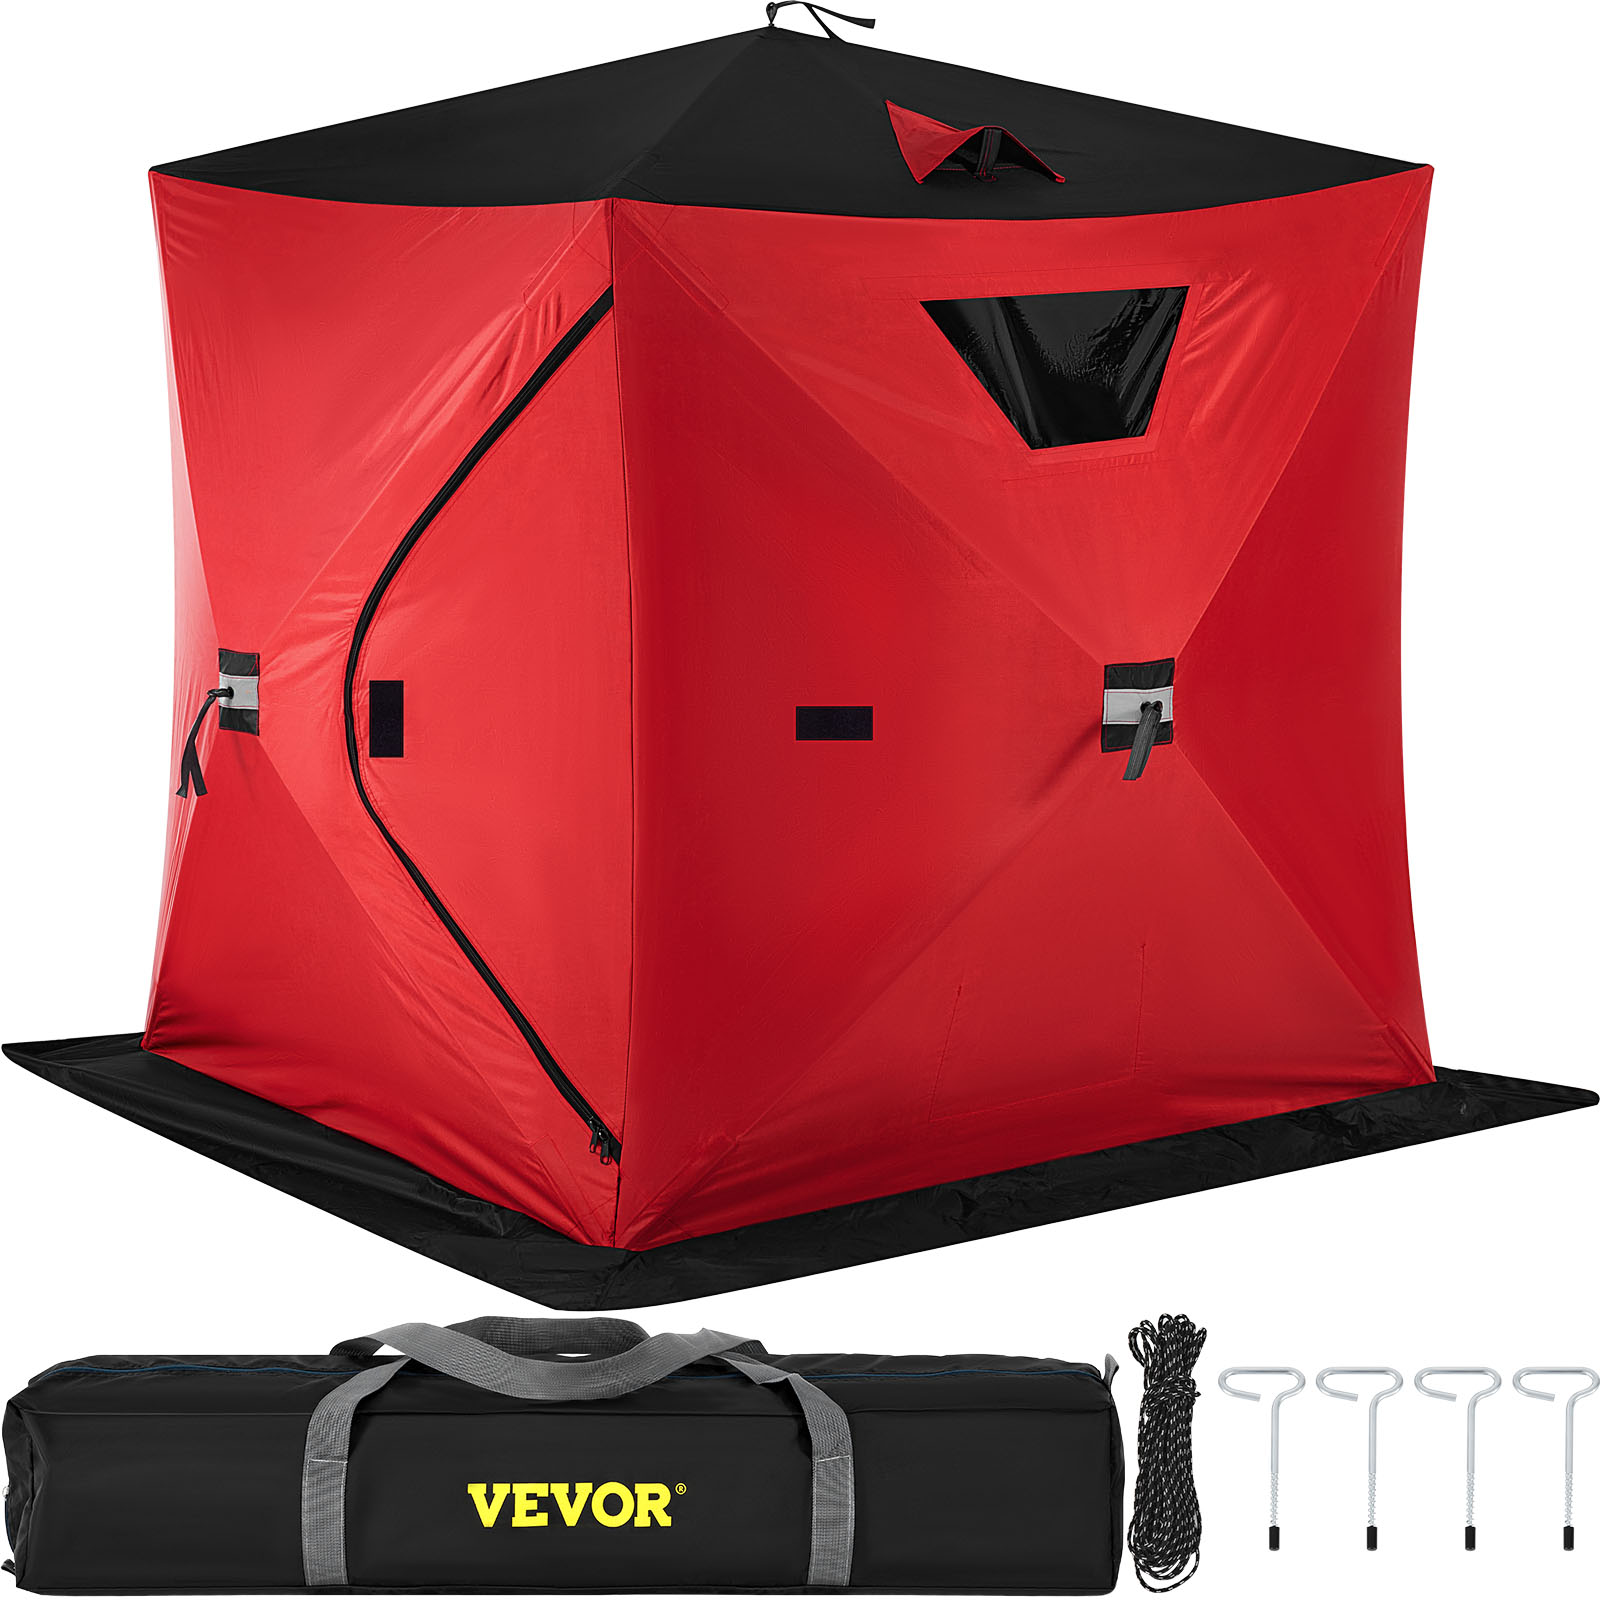 Ice Shelter Fishing Tent Shanty 2-person Pop-up Stability Waterproof W/ Bag от Vevor Many GEOs